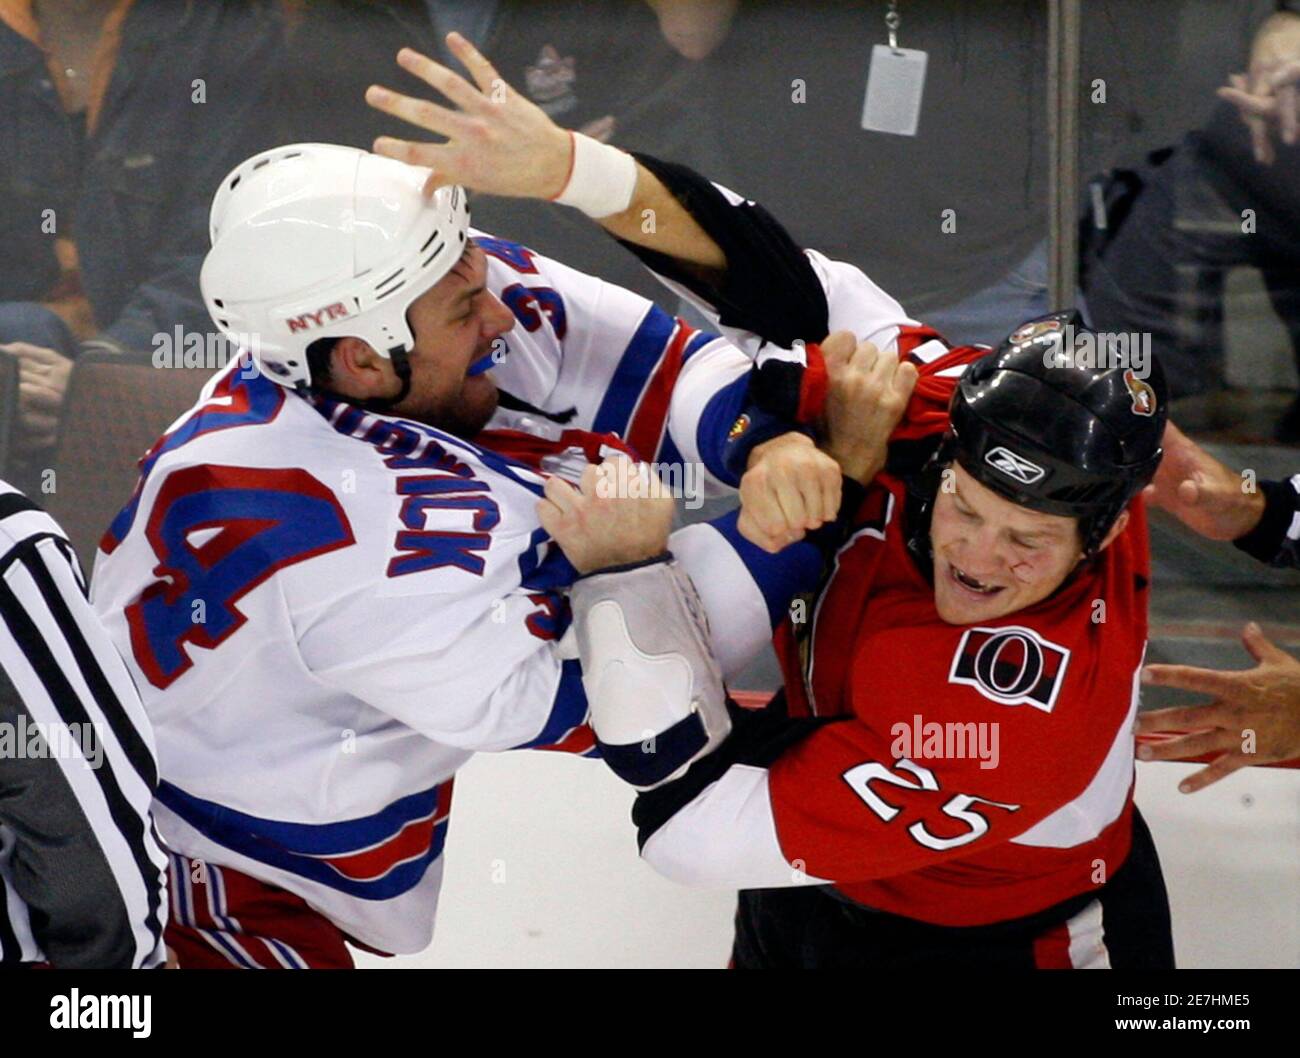 New York Rangers' Jason Strudwick (L) fights with Ottawa Senators' Chris Neil during the first period of their NHL hockey game in Ottawa October 6, 2007.        REUTERS/Chris Wattie   (CANADA) Stock Photo